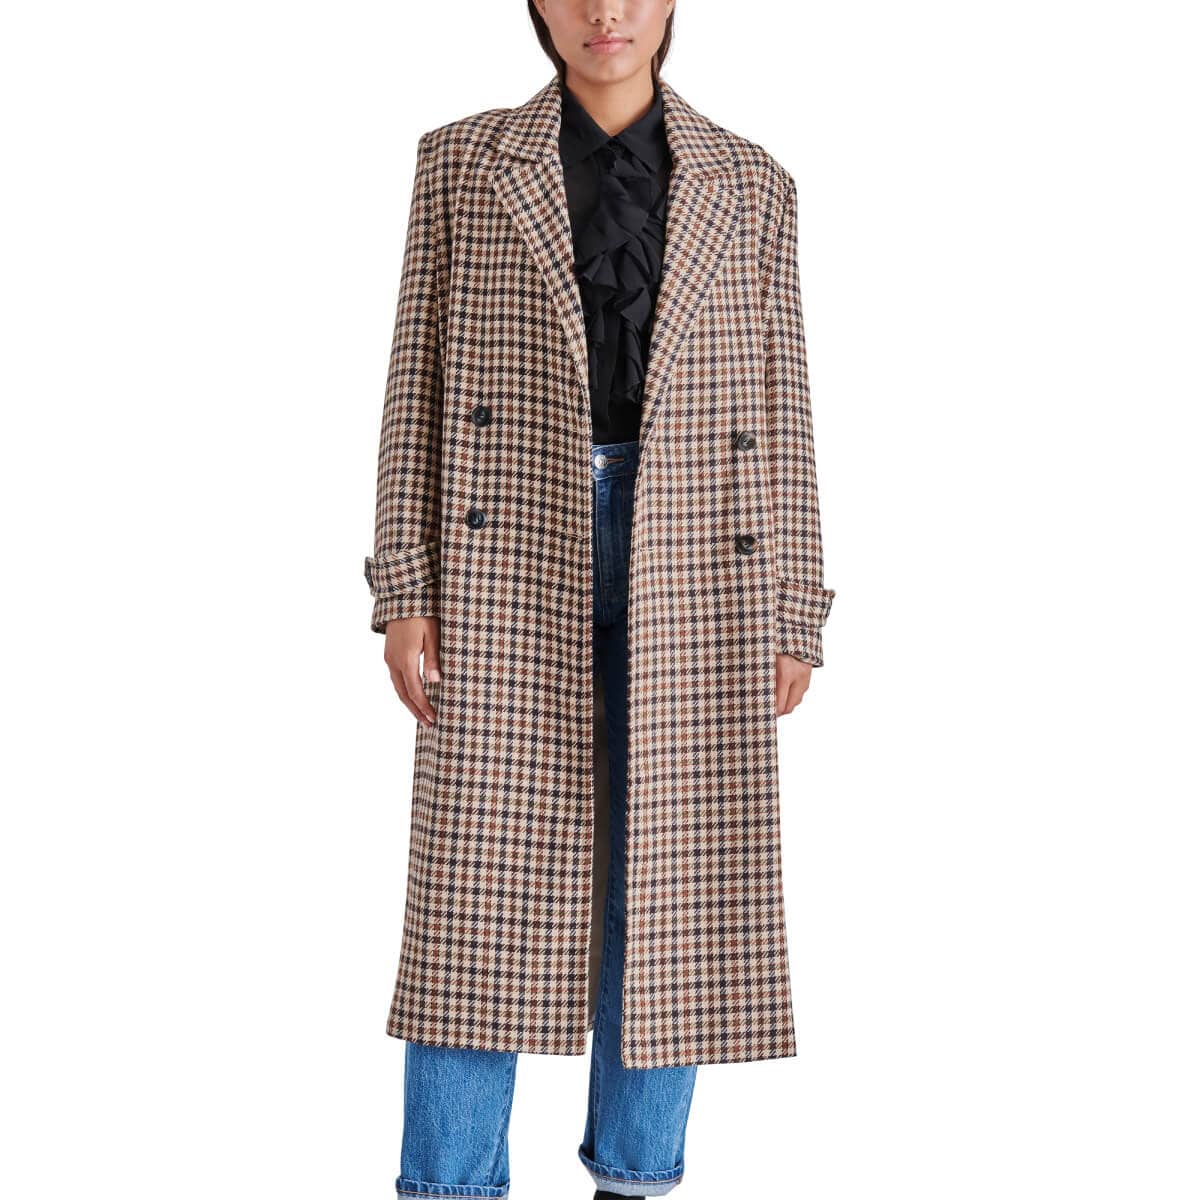 Steve Madden Prince Double Breasted Long Coat brown plaid front | MILK MONEY milkmoney.co | cute jackets for women, cute coats. cool jackets for women, stylish jackets for women, trendy jackets for women, trendy womens coats.